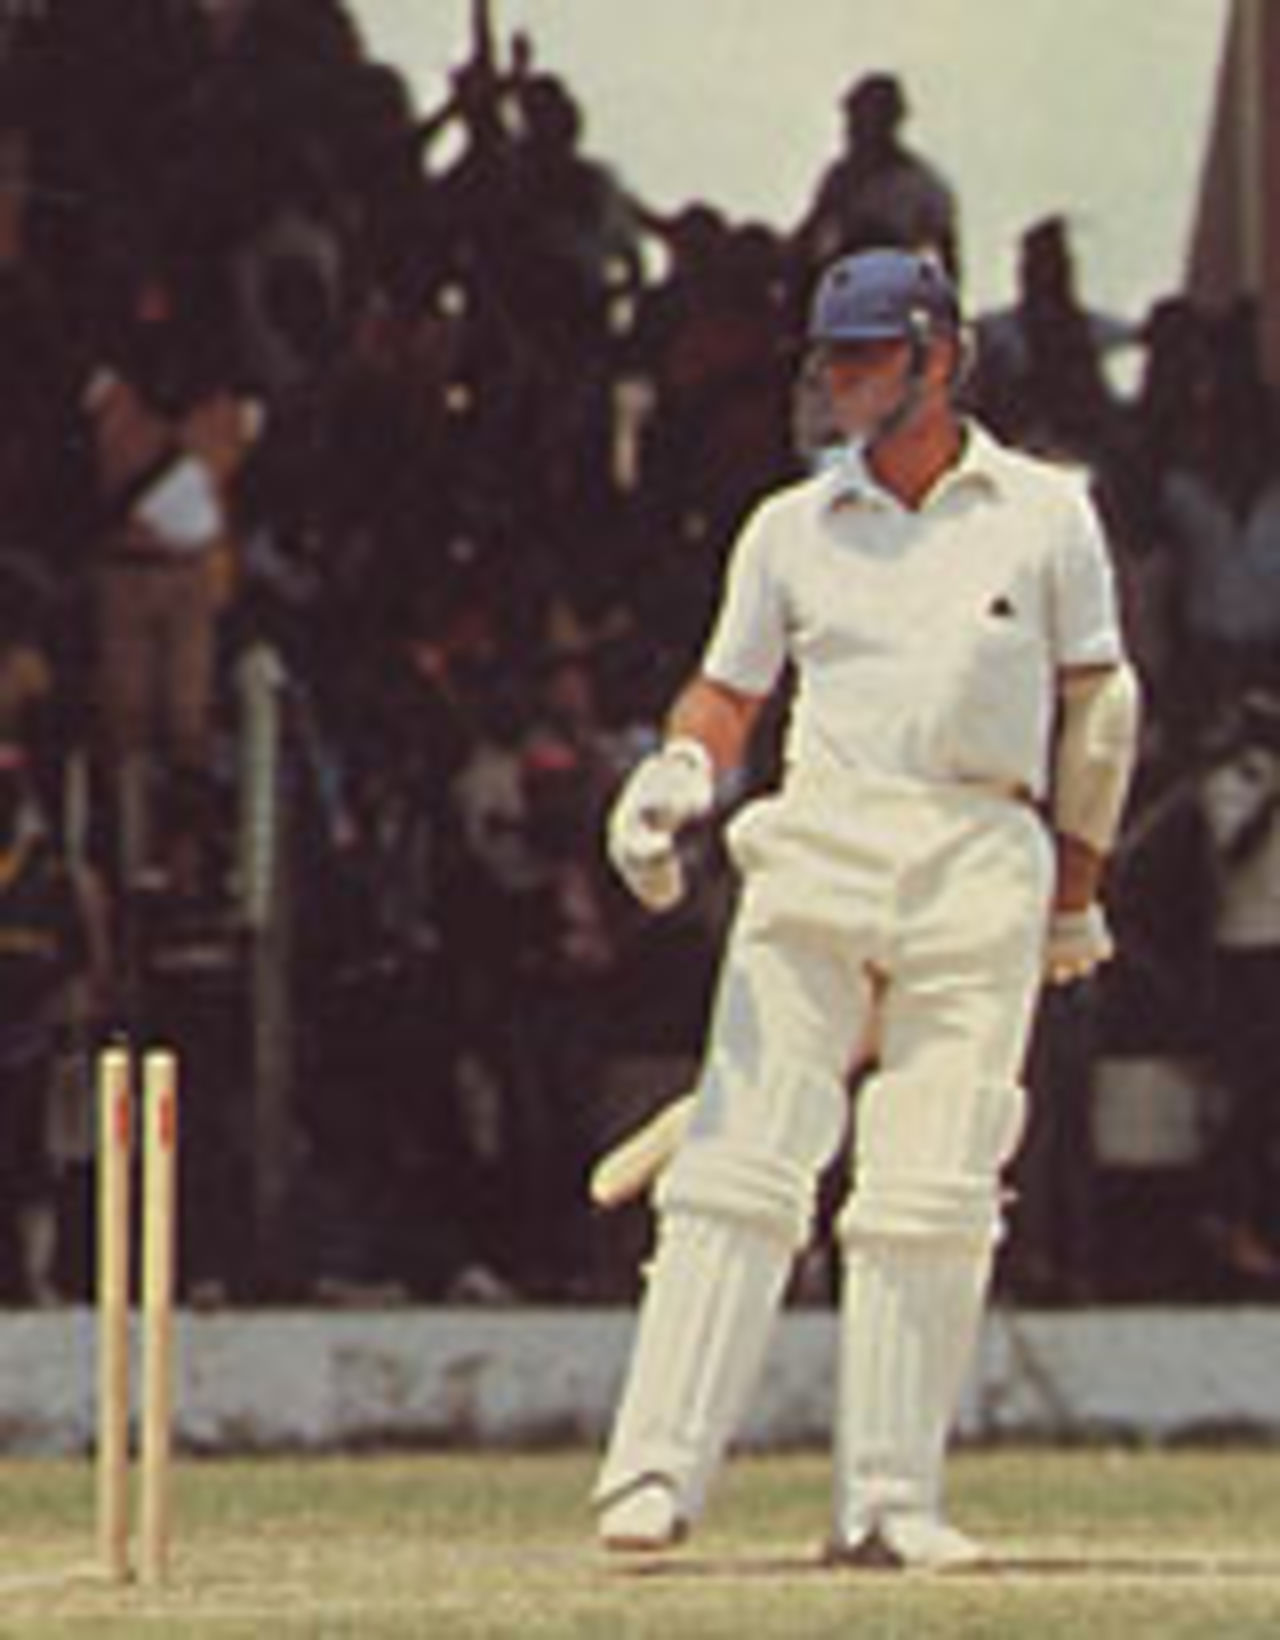 Geoff Boycott bowled by Michael Holding for 0, West Indies v England, 3rd Test, Barbados, March 14, 1981